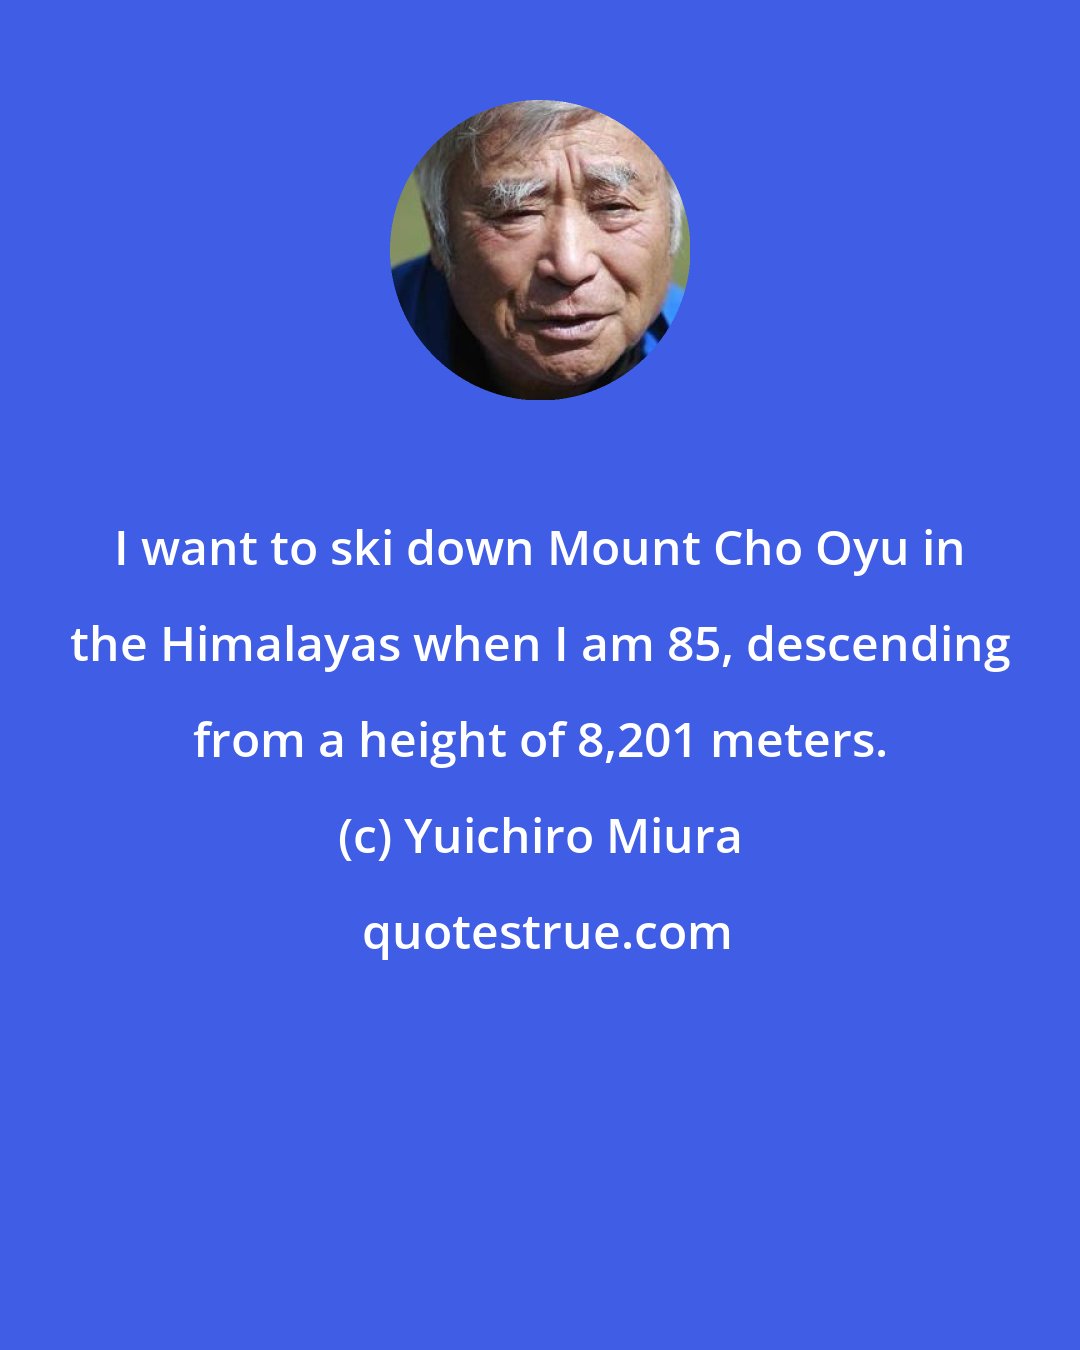 Yuichiro Miura: I want to ski down Mount Cho Oyu in the Himalayas when I am 85, descending from a height of 8,201 meters.